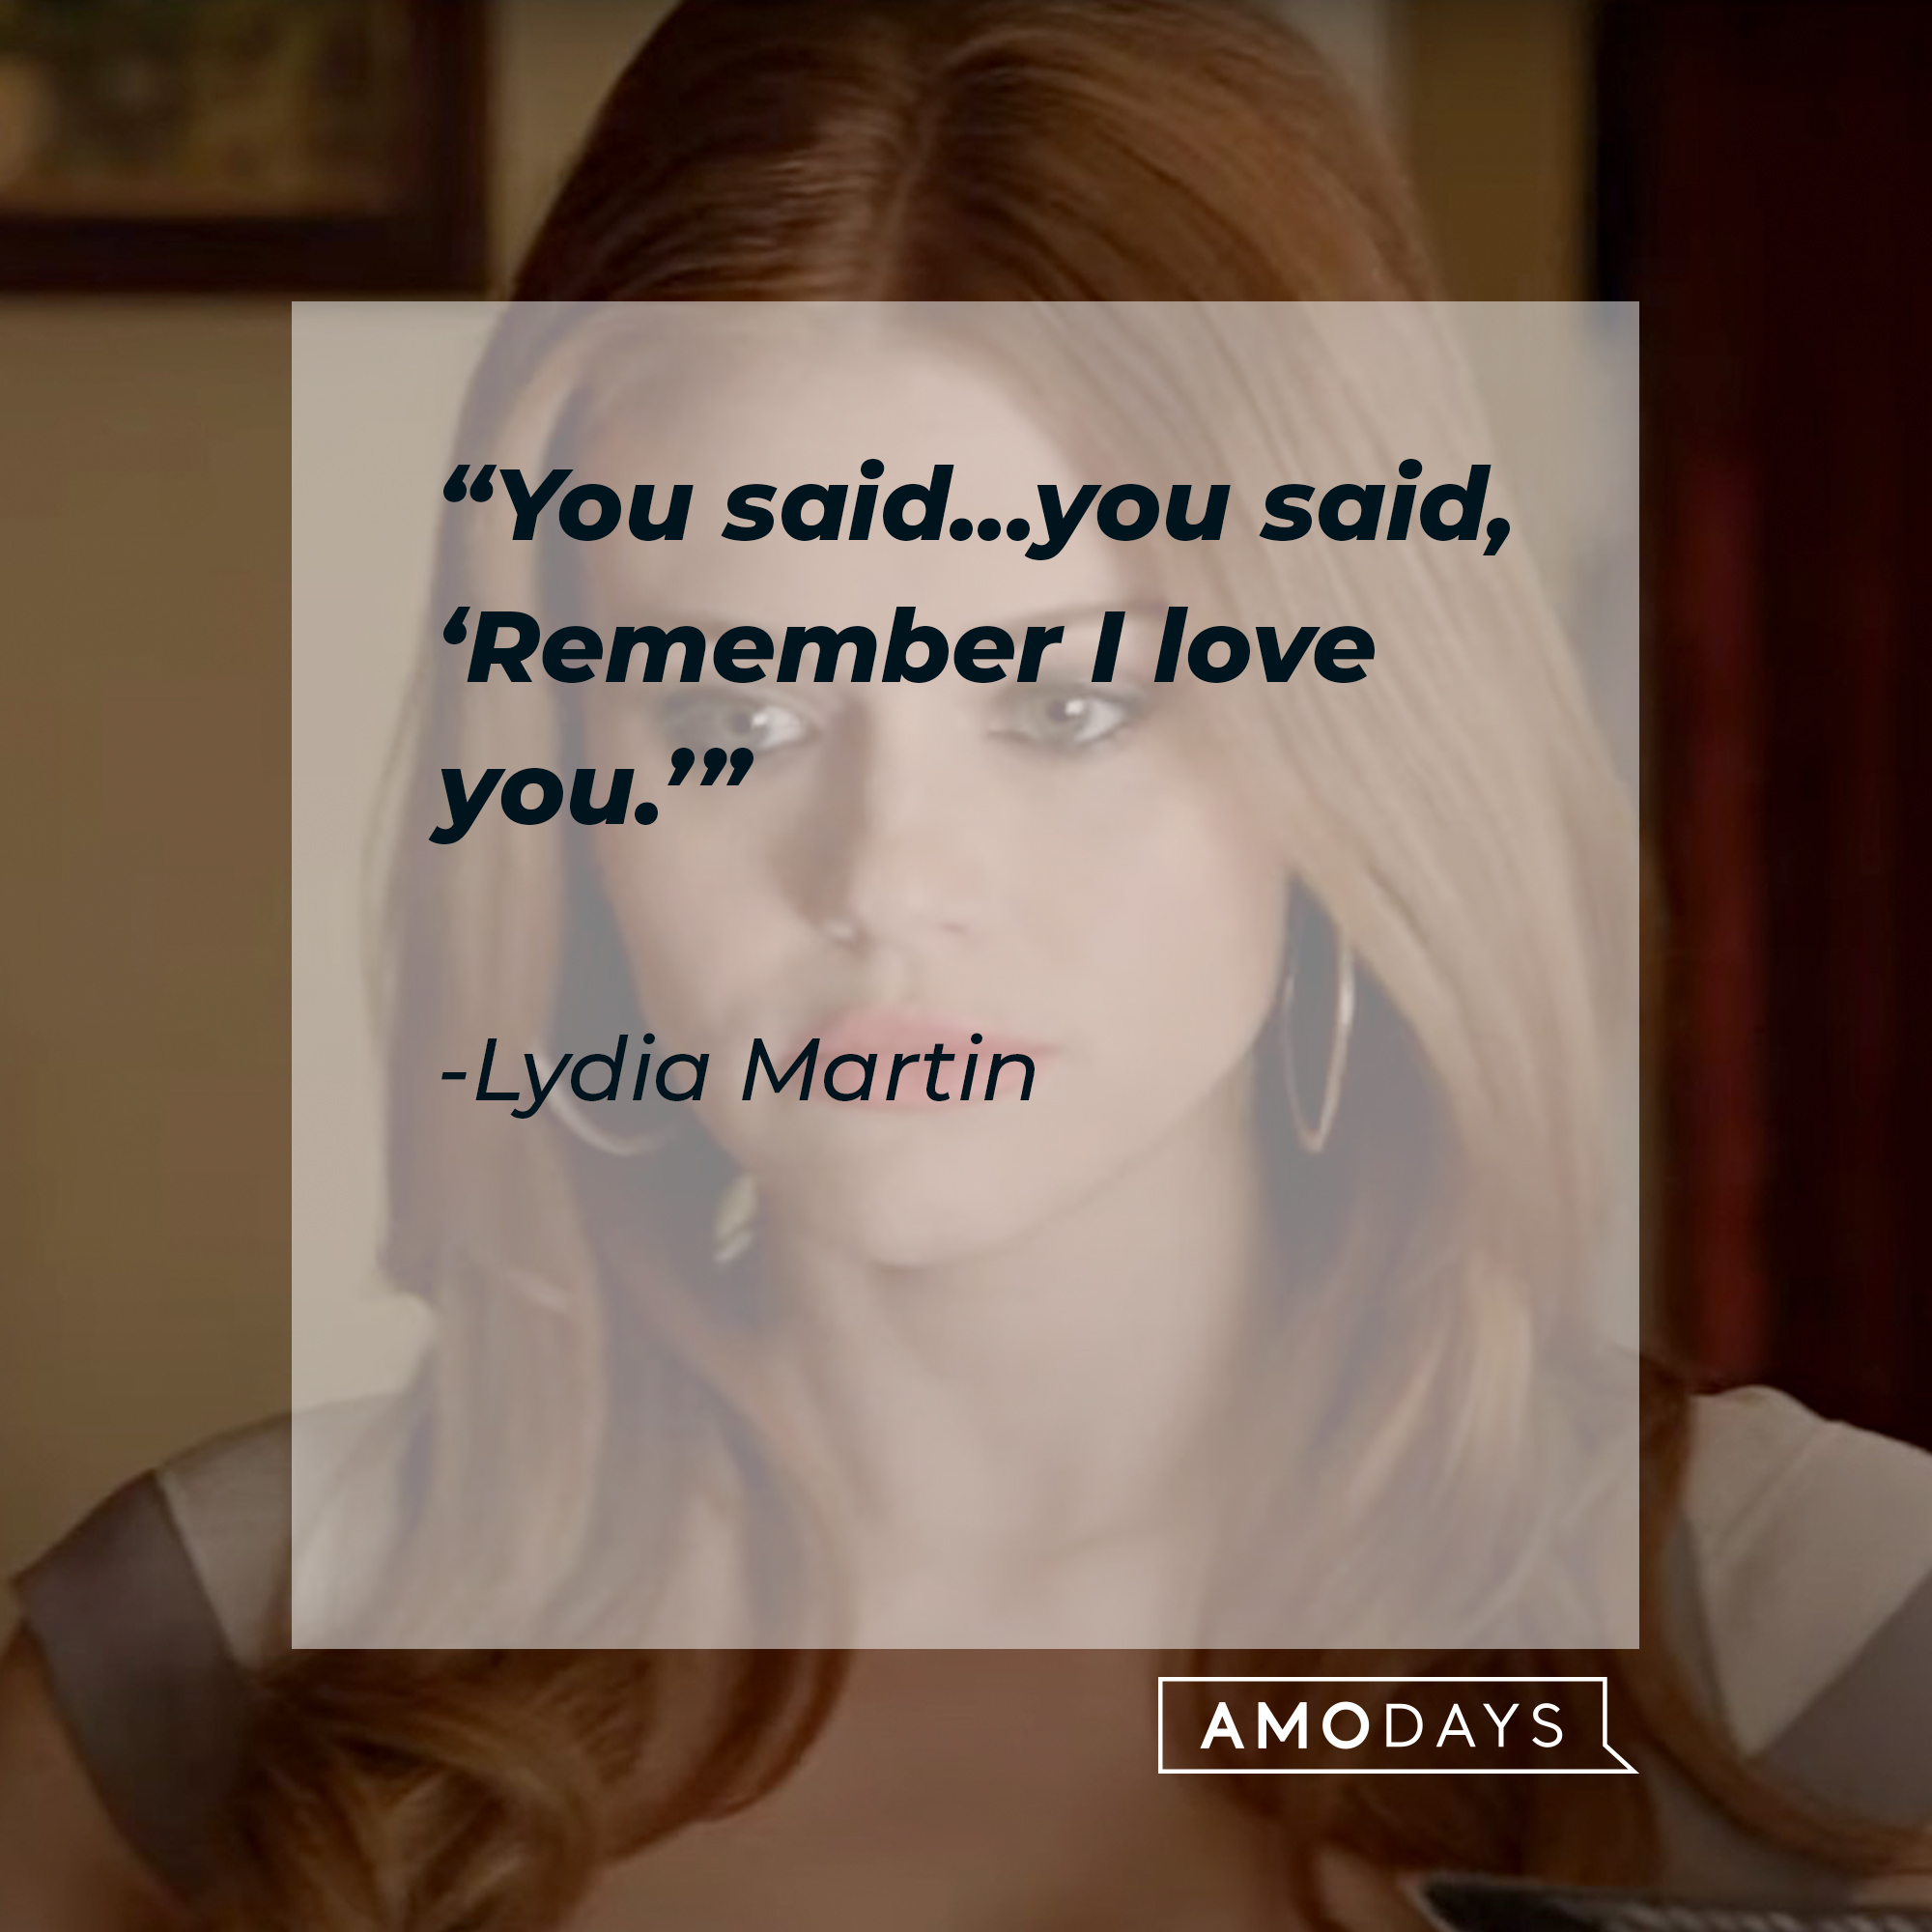 Lydia Martin with her quote: “You said...you said, ‘Remember I love you.’” | Source: facebook.com/TeenWolf